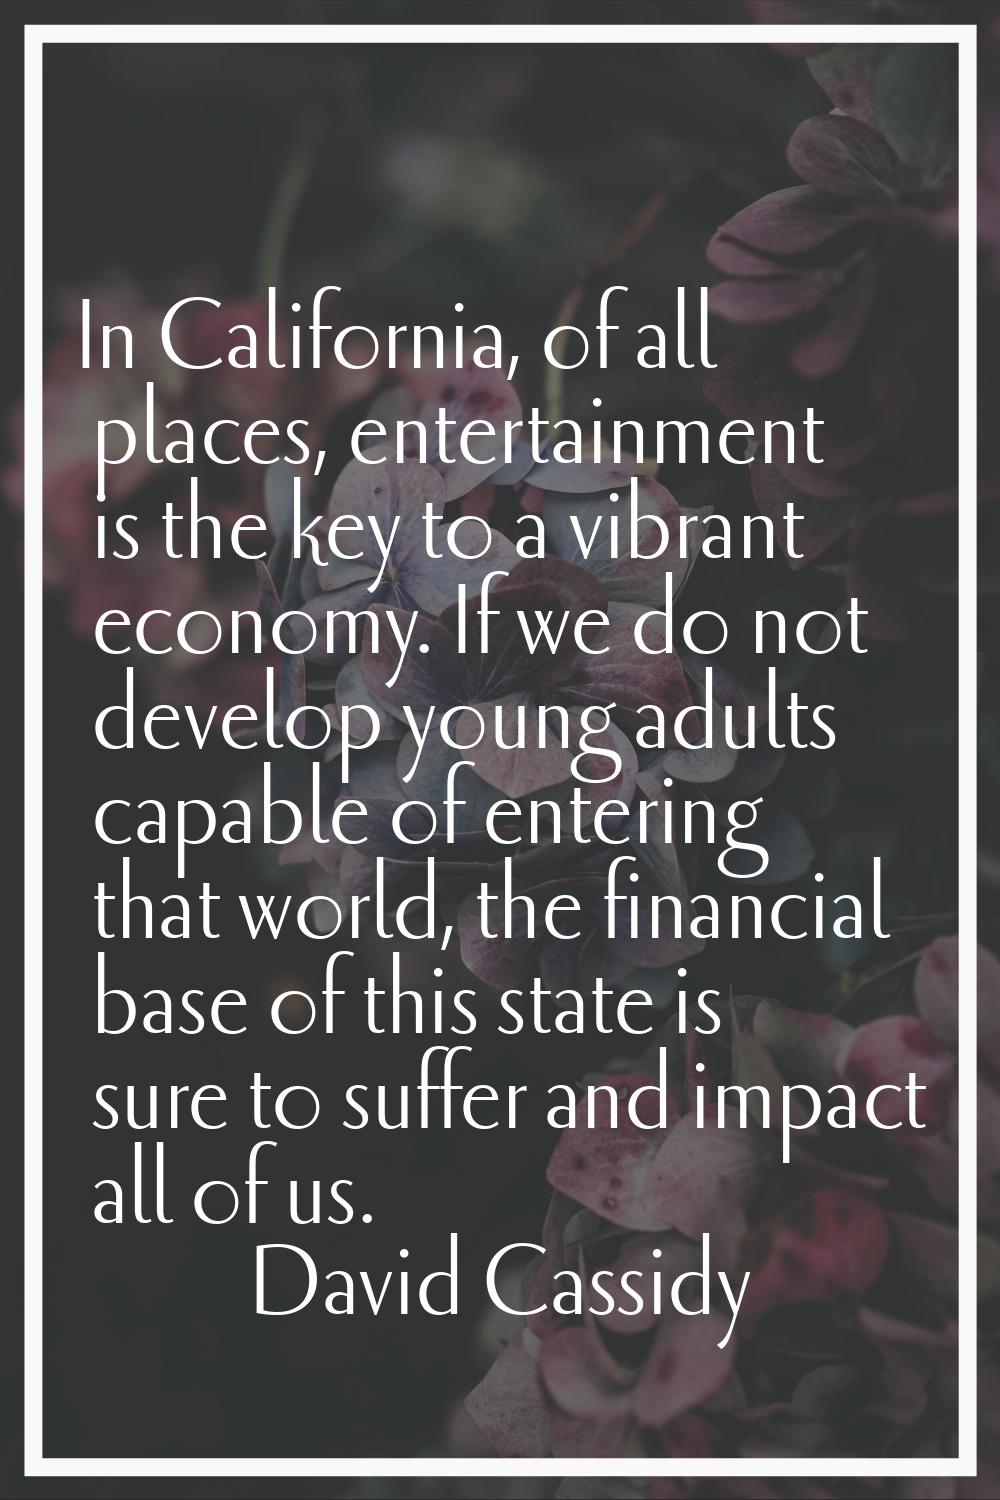 In California, of all places, entertainment is the key to a vibrant economy. If we do not develop y